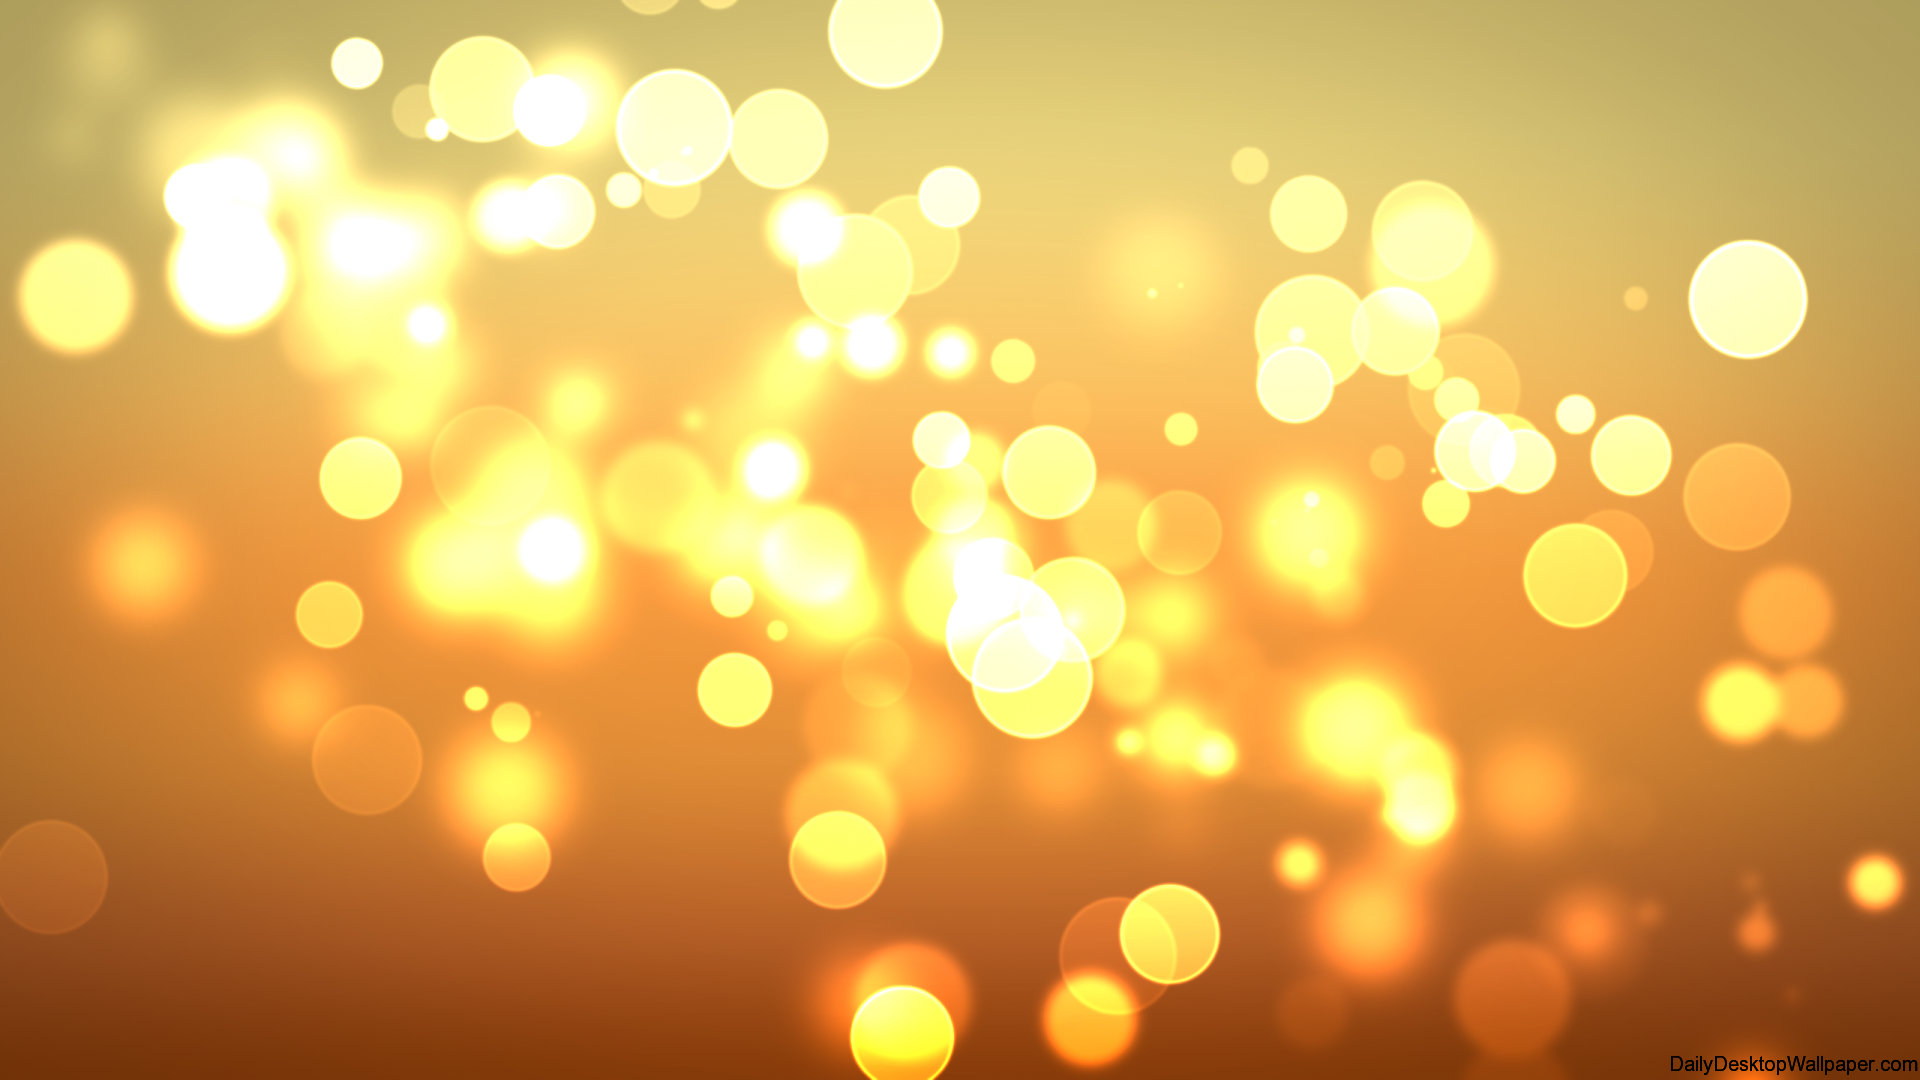 Light Gold Abstract Background Wallpaper 06545